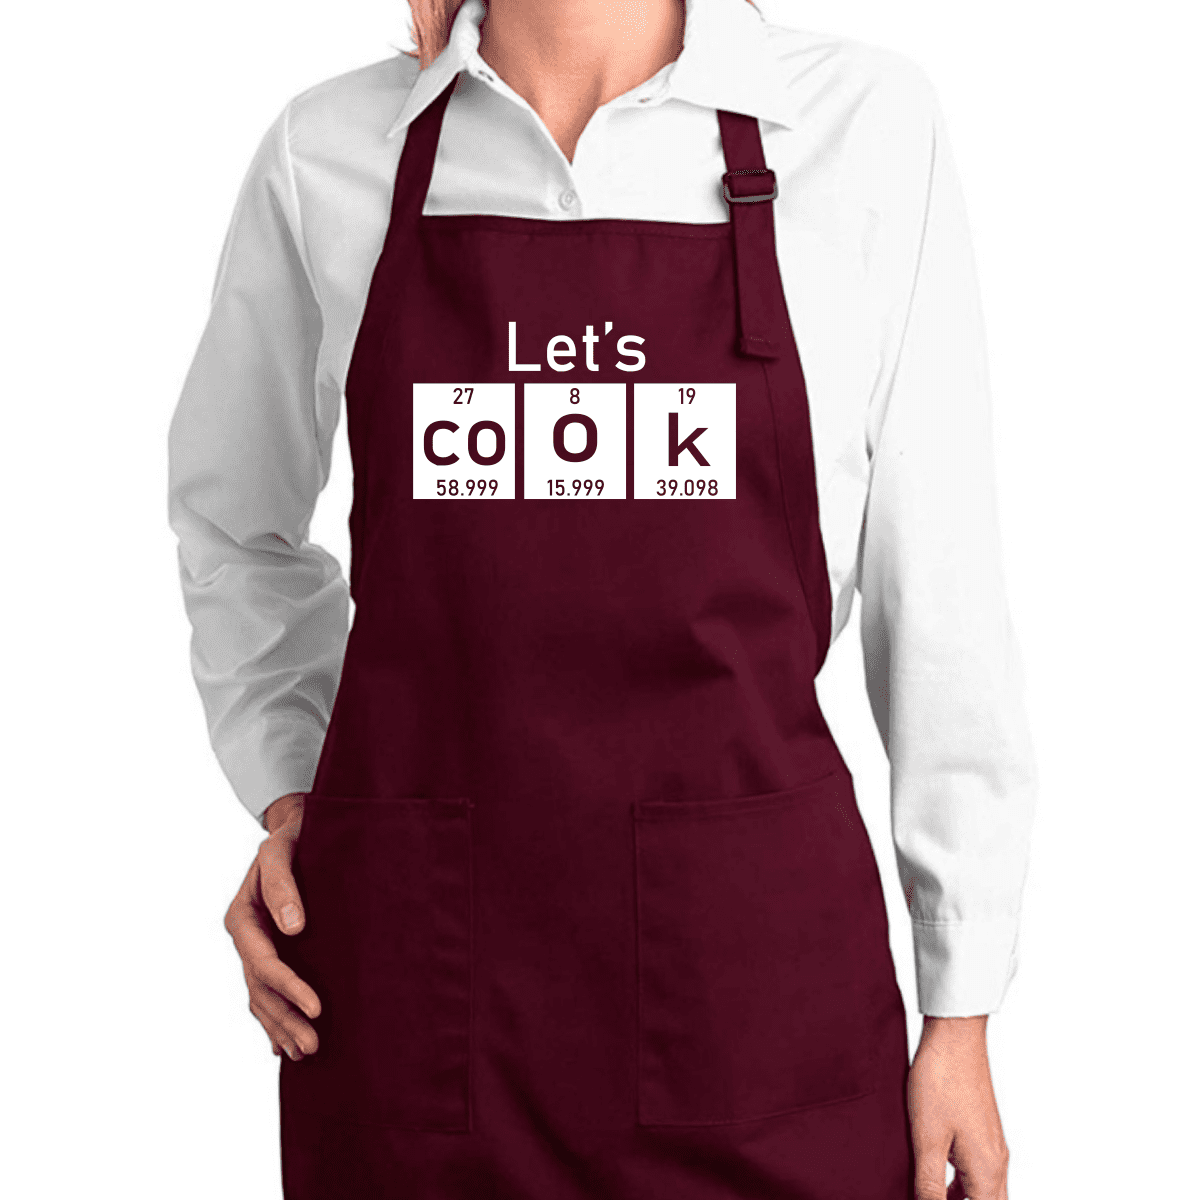 Funny Novelty Apron Kitchen Cooking Beer The Essential Element 